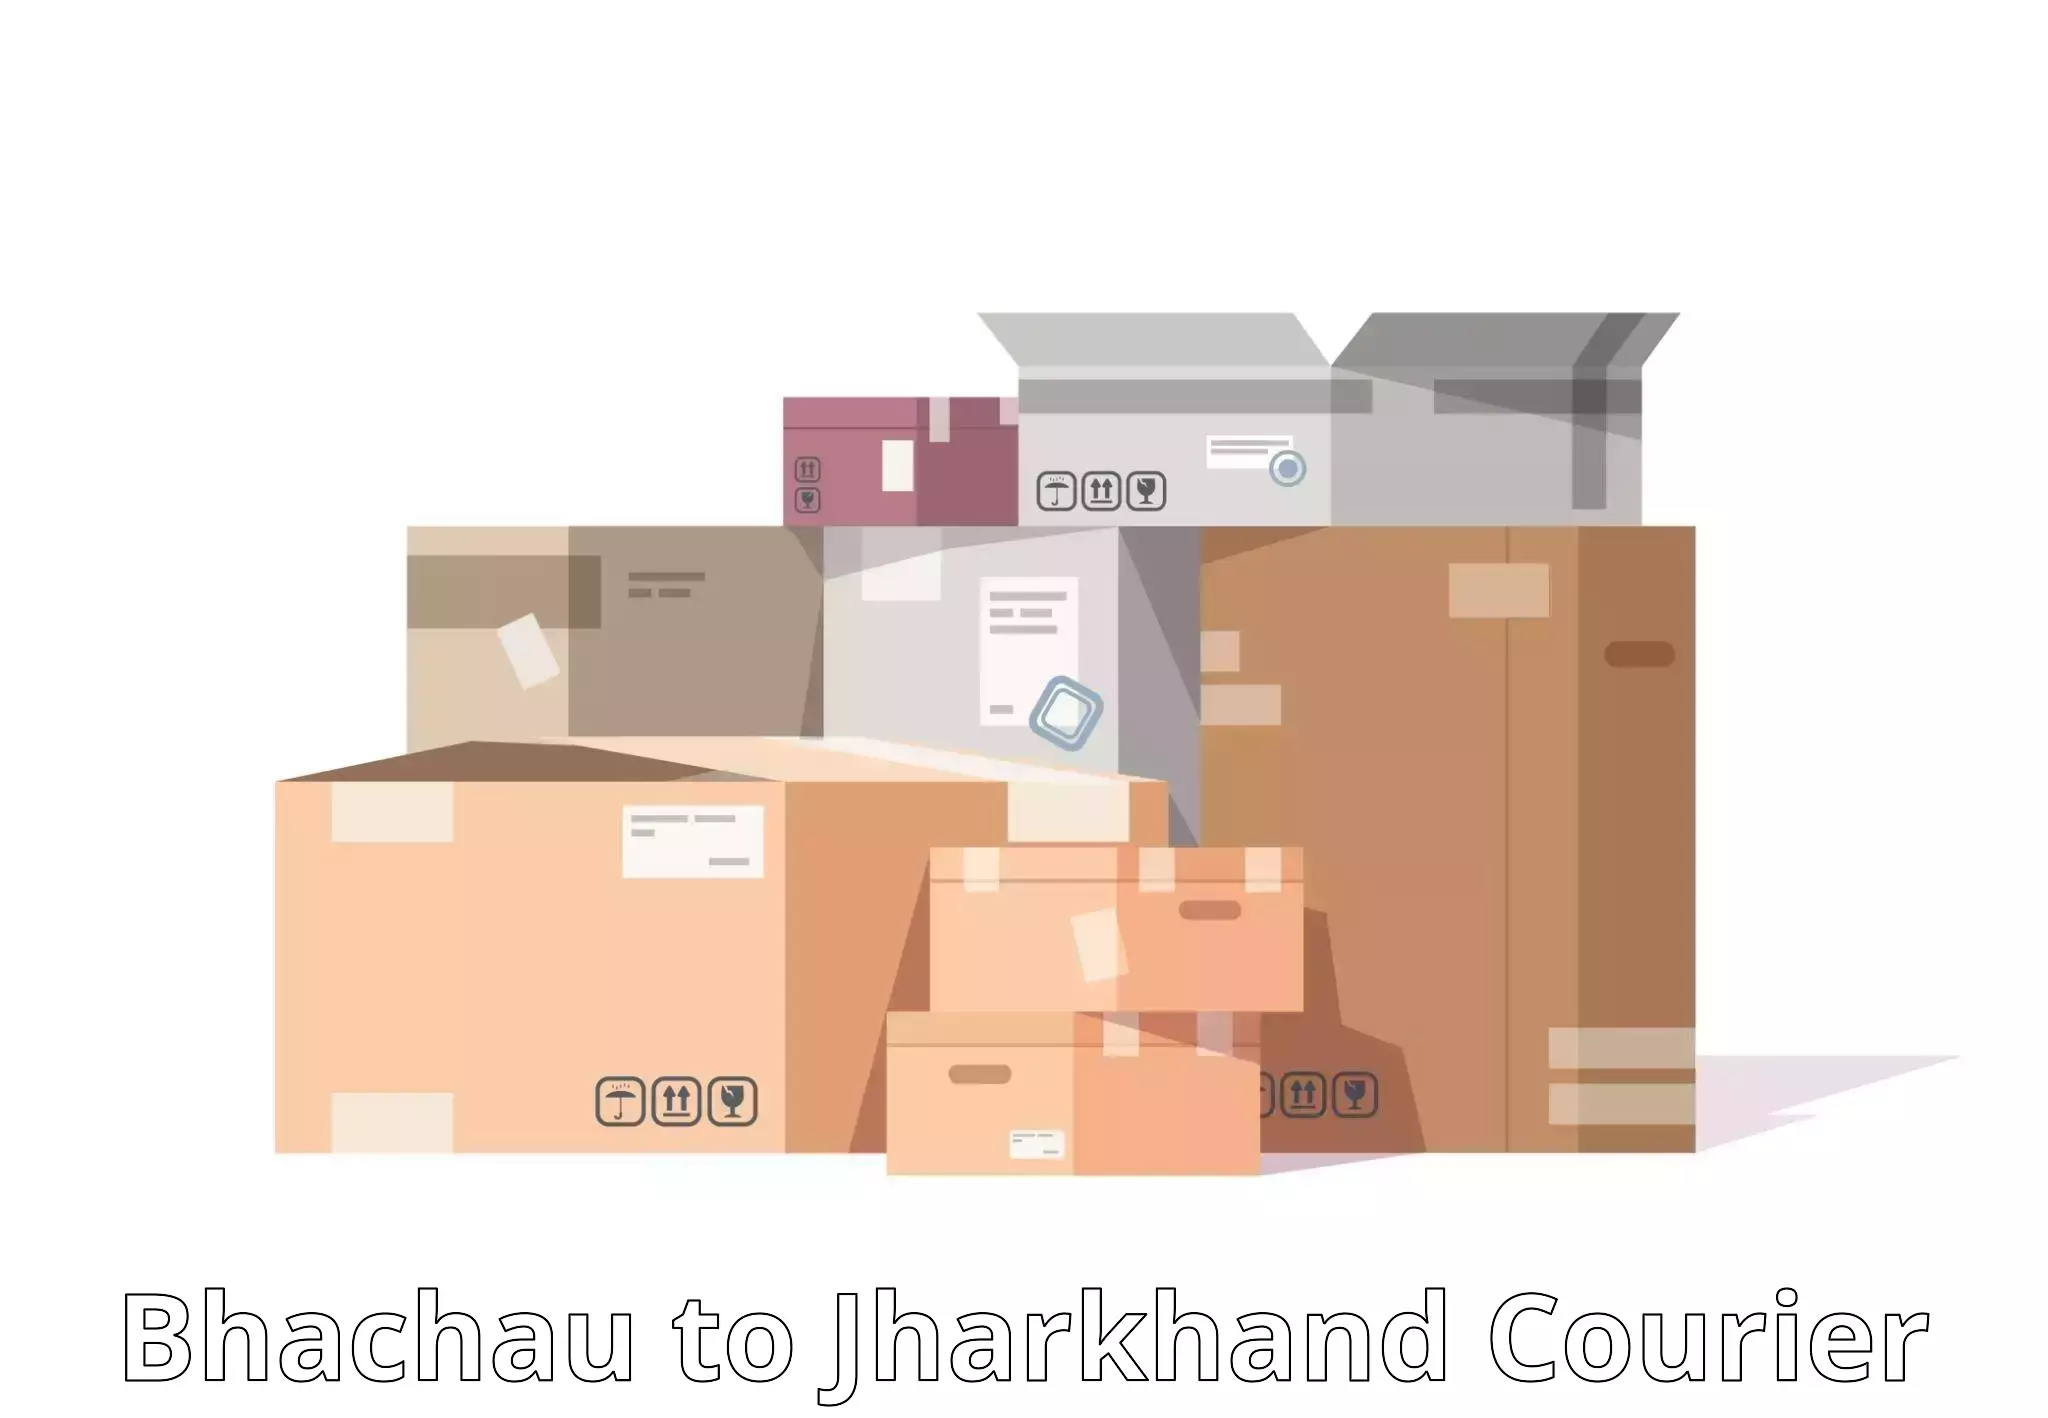 Parcel service for businesses Bhachau to Chandwa